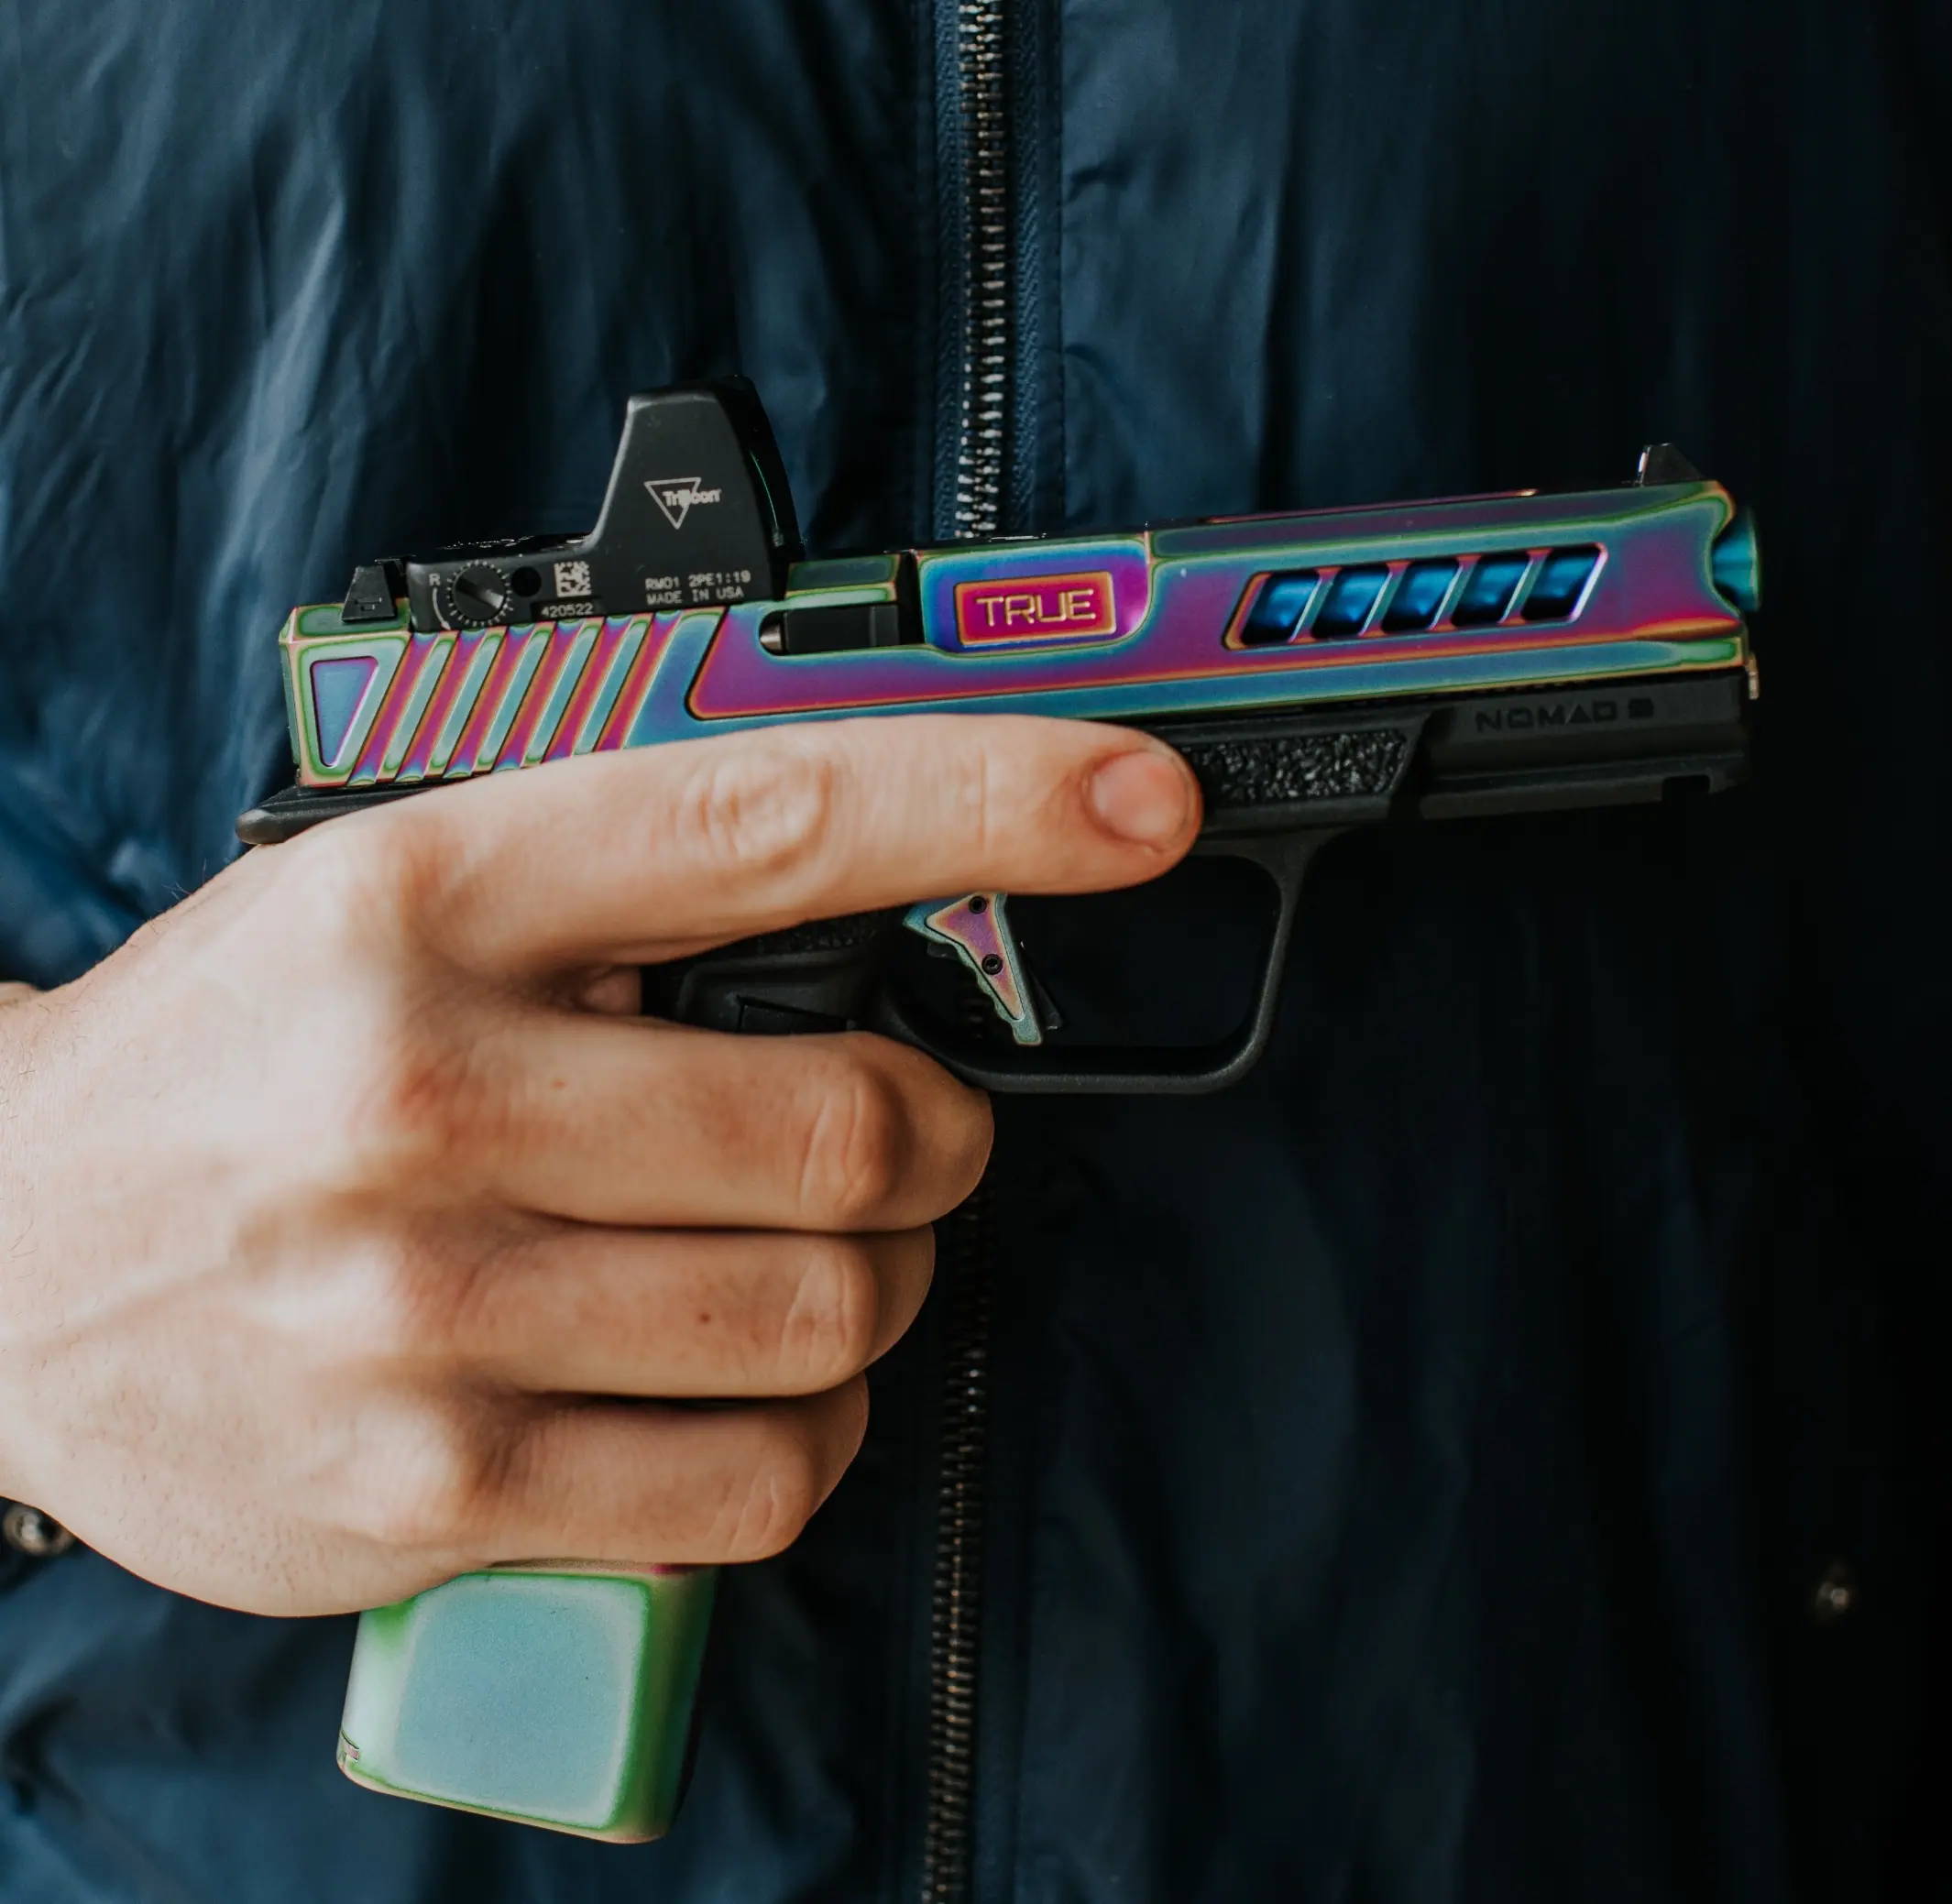 Glock 19, with Spectrum slide barrel and trigger being held by someone in a zip up jacket.